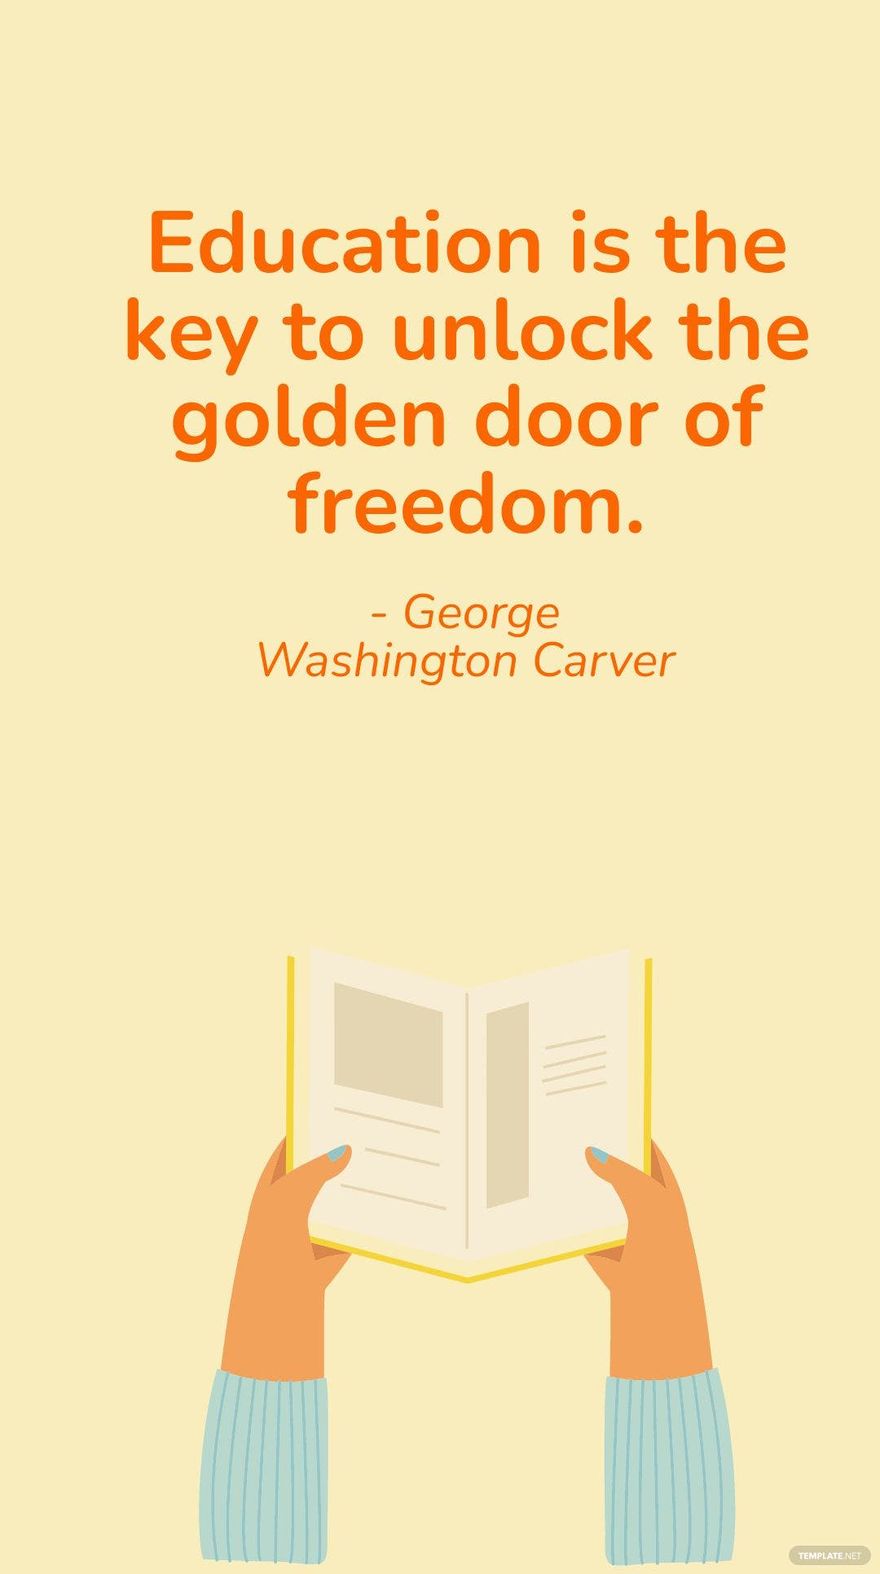 George Washington Carver - Education is the key to unlock the golden door of freedom.